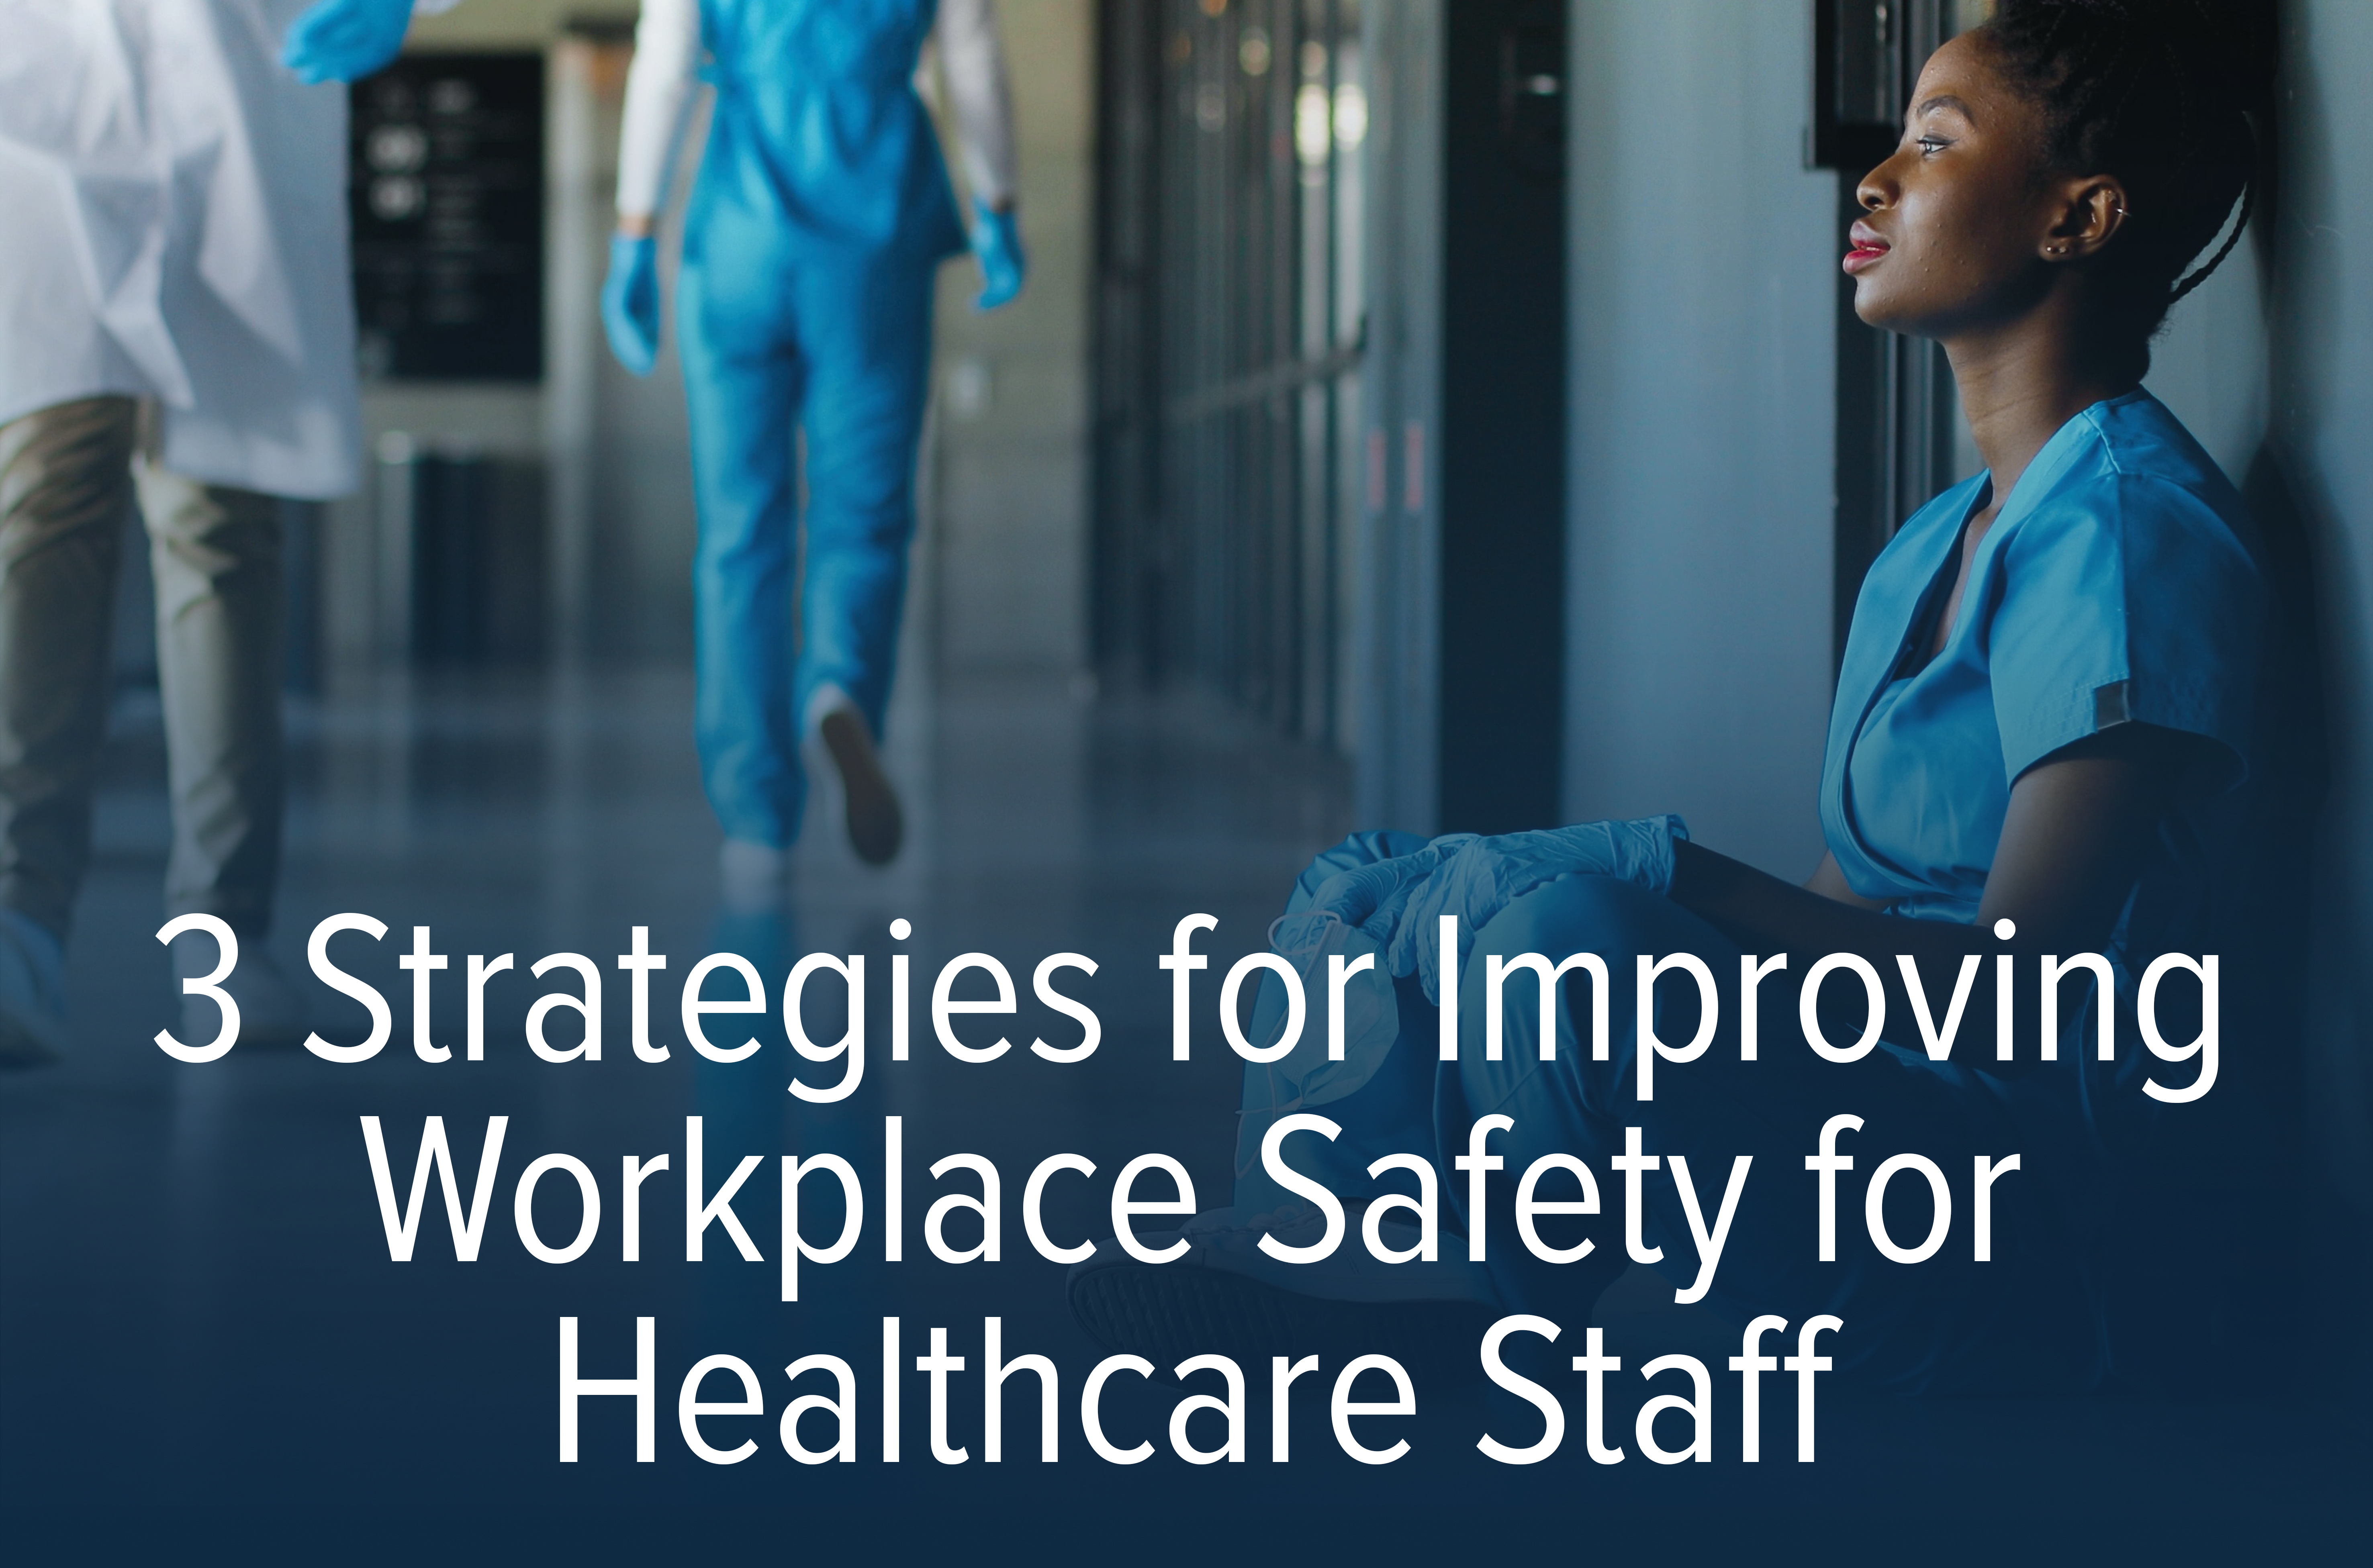 3 strategies for improving workplace safety for healthcare staff and an image of a nurse with a dejected look in a hospital setting